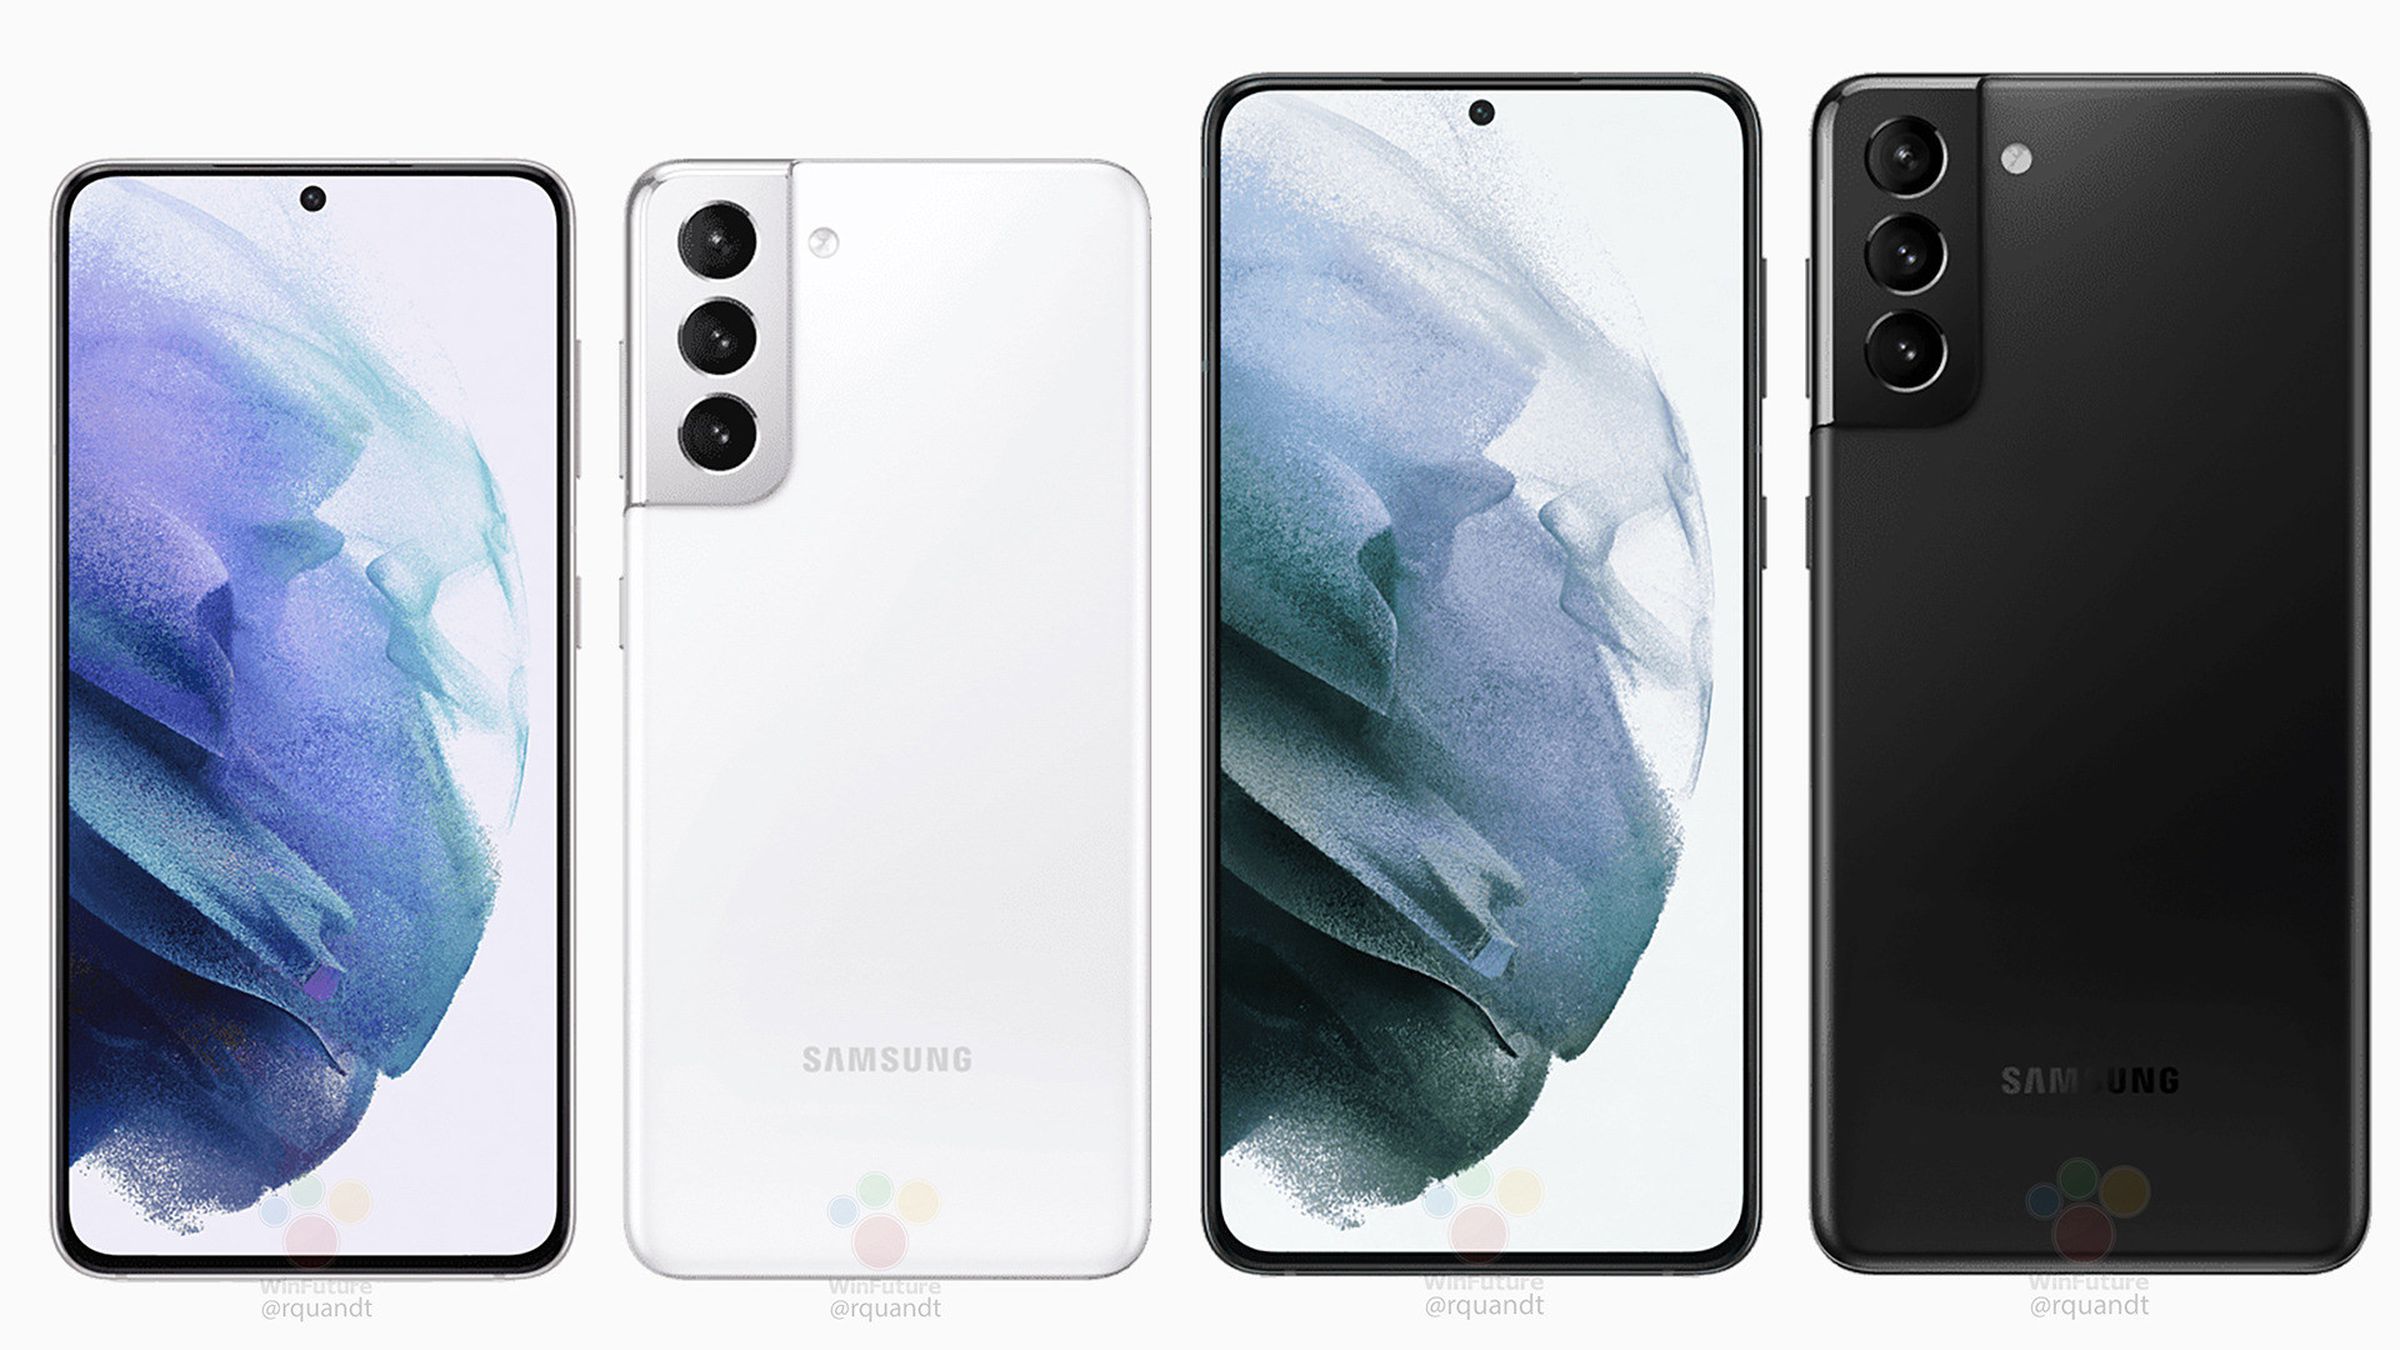 The S21 and S21 Plus appear to offer similar rear-facing triple camera arrays.